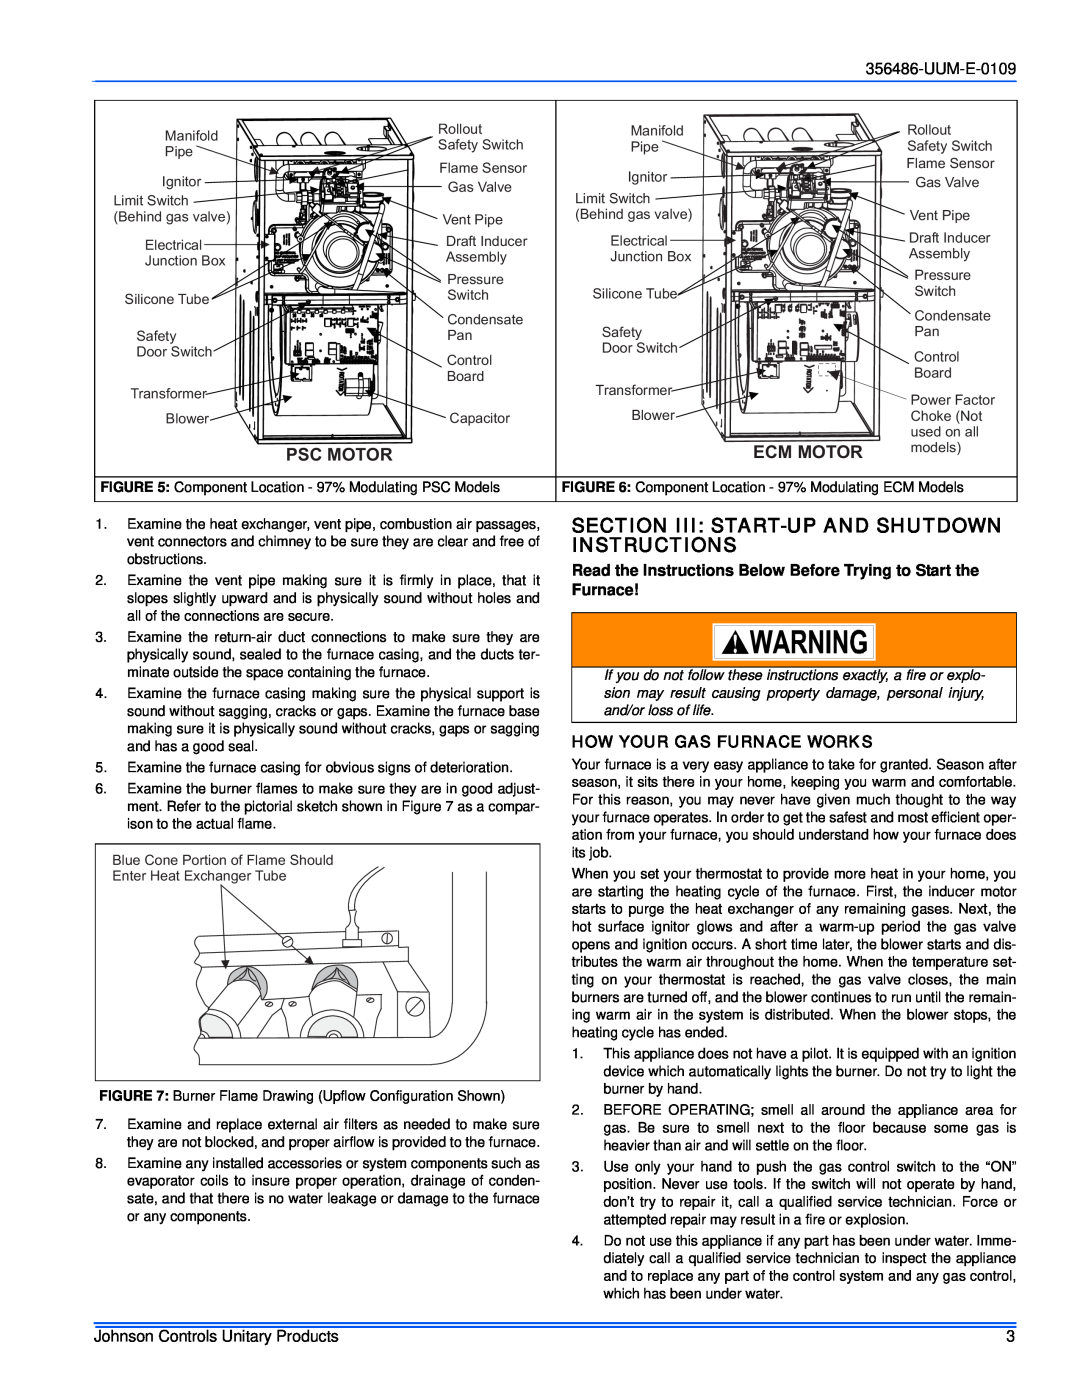 Johnson Controls 356486-UUM-E-0109 Section Iii Start-Upand Shutdown Instructions, How Your Gas Furnace Works, Psc Motor 